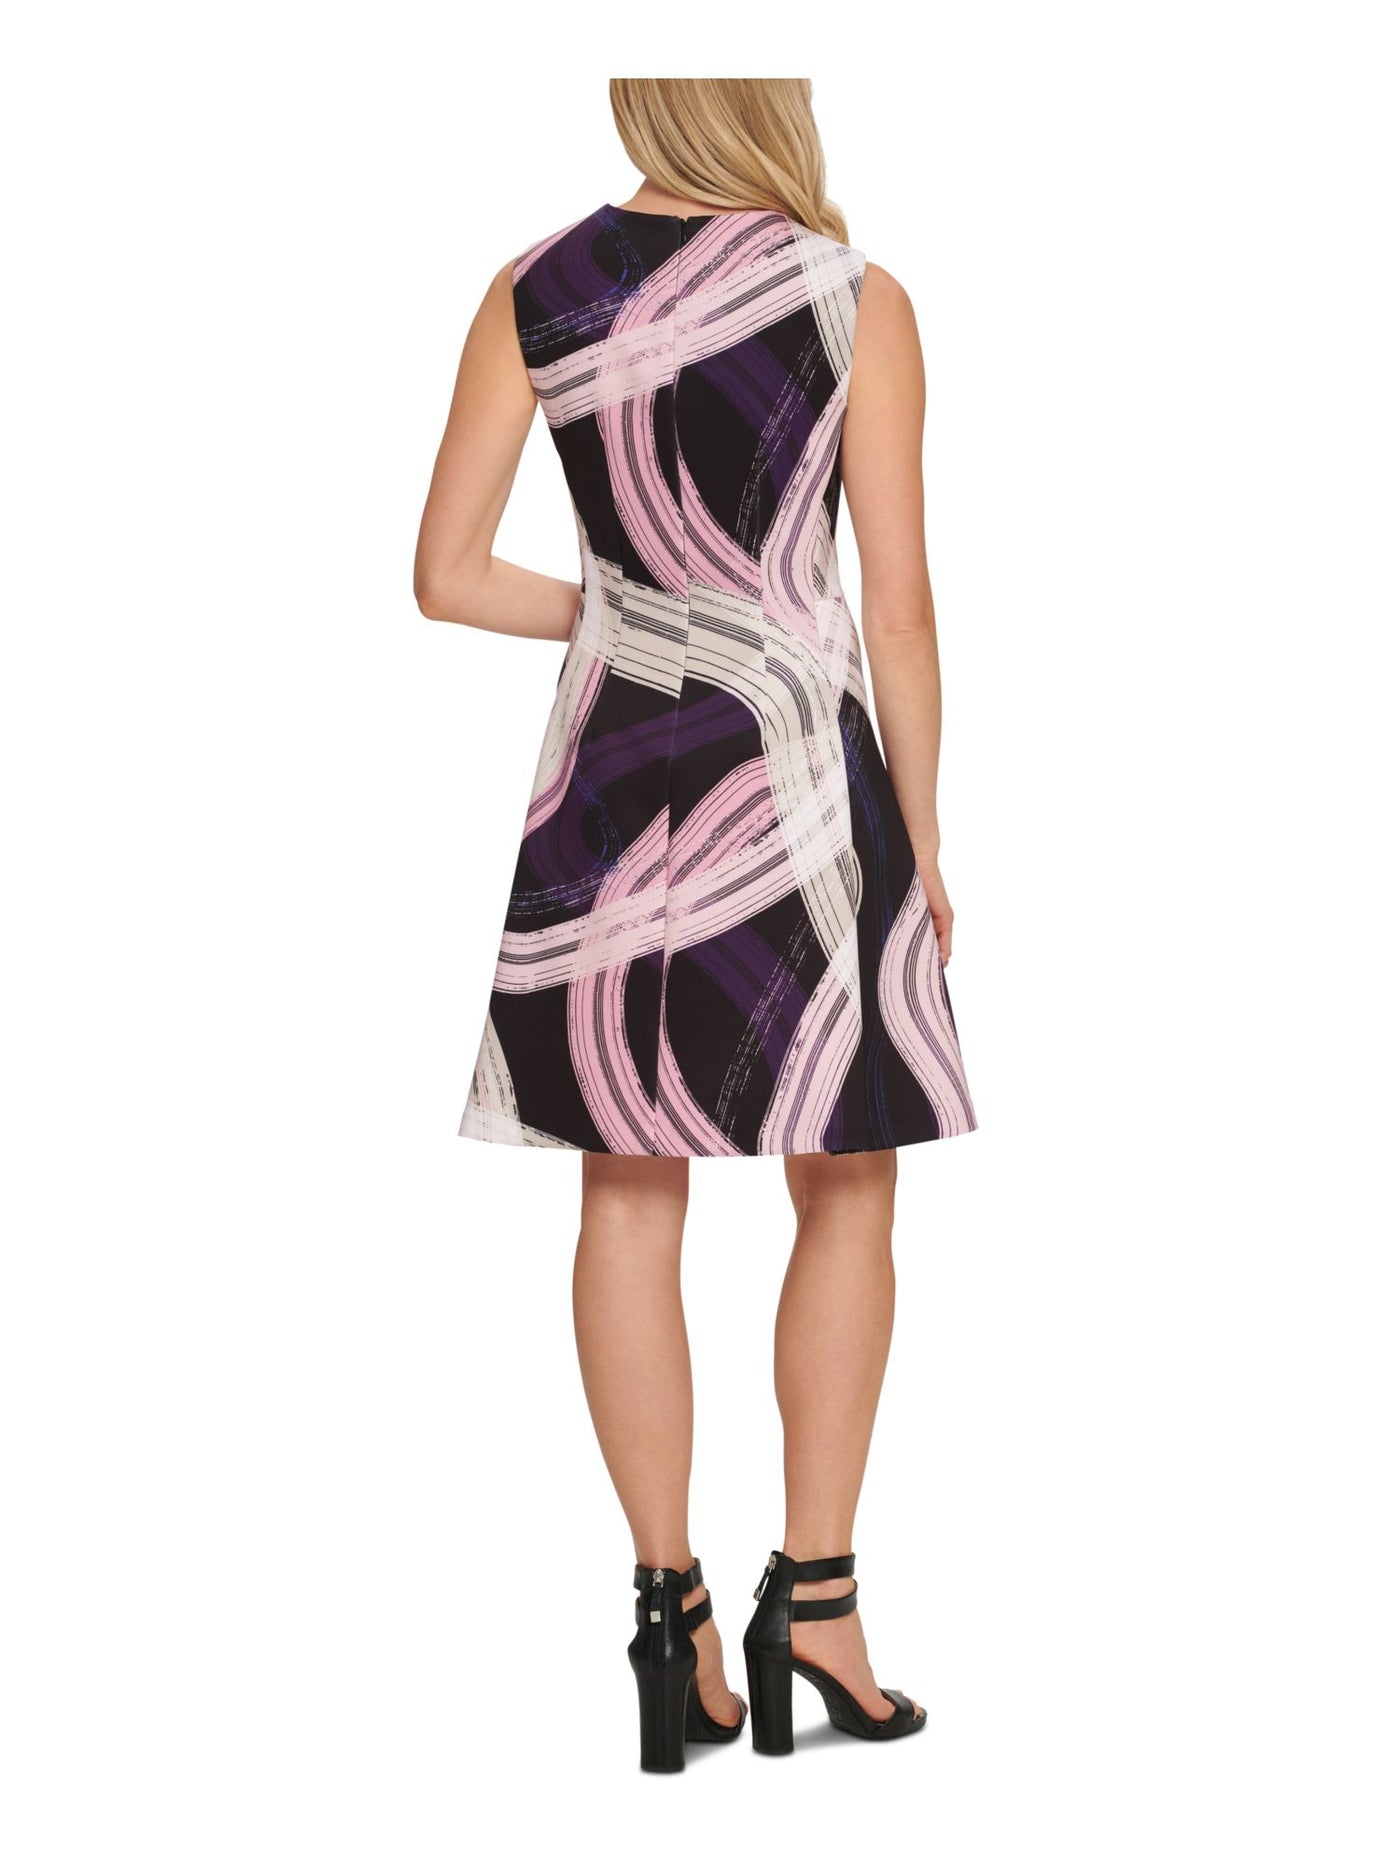 DKNY Womens Purple Pleated Zippered Printed Sleeveless Jewel Neck Above The Knee Wear To Work Fit + Flare Dress 2